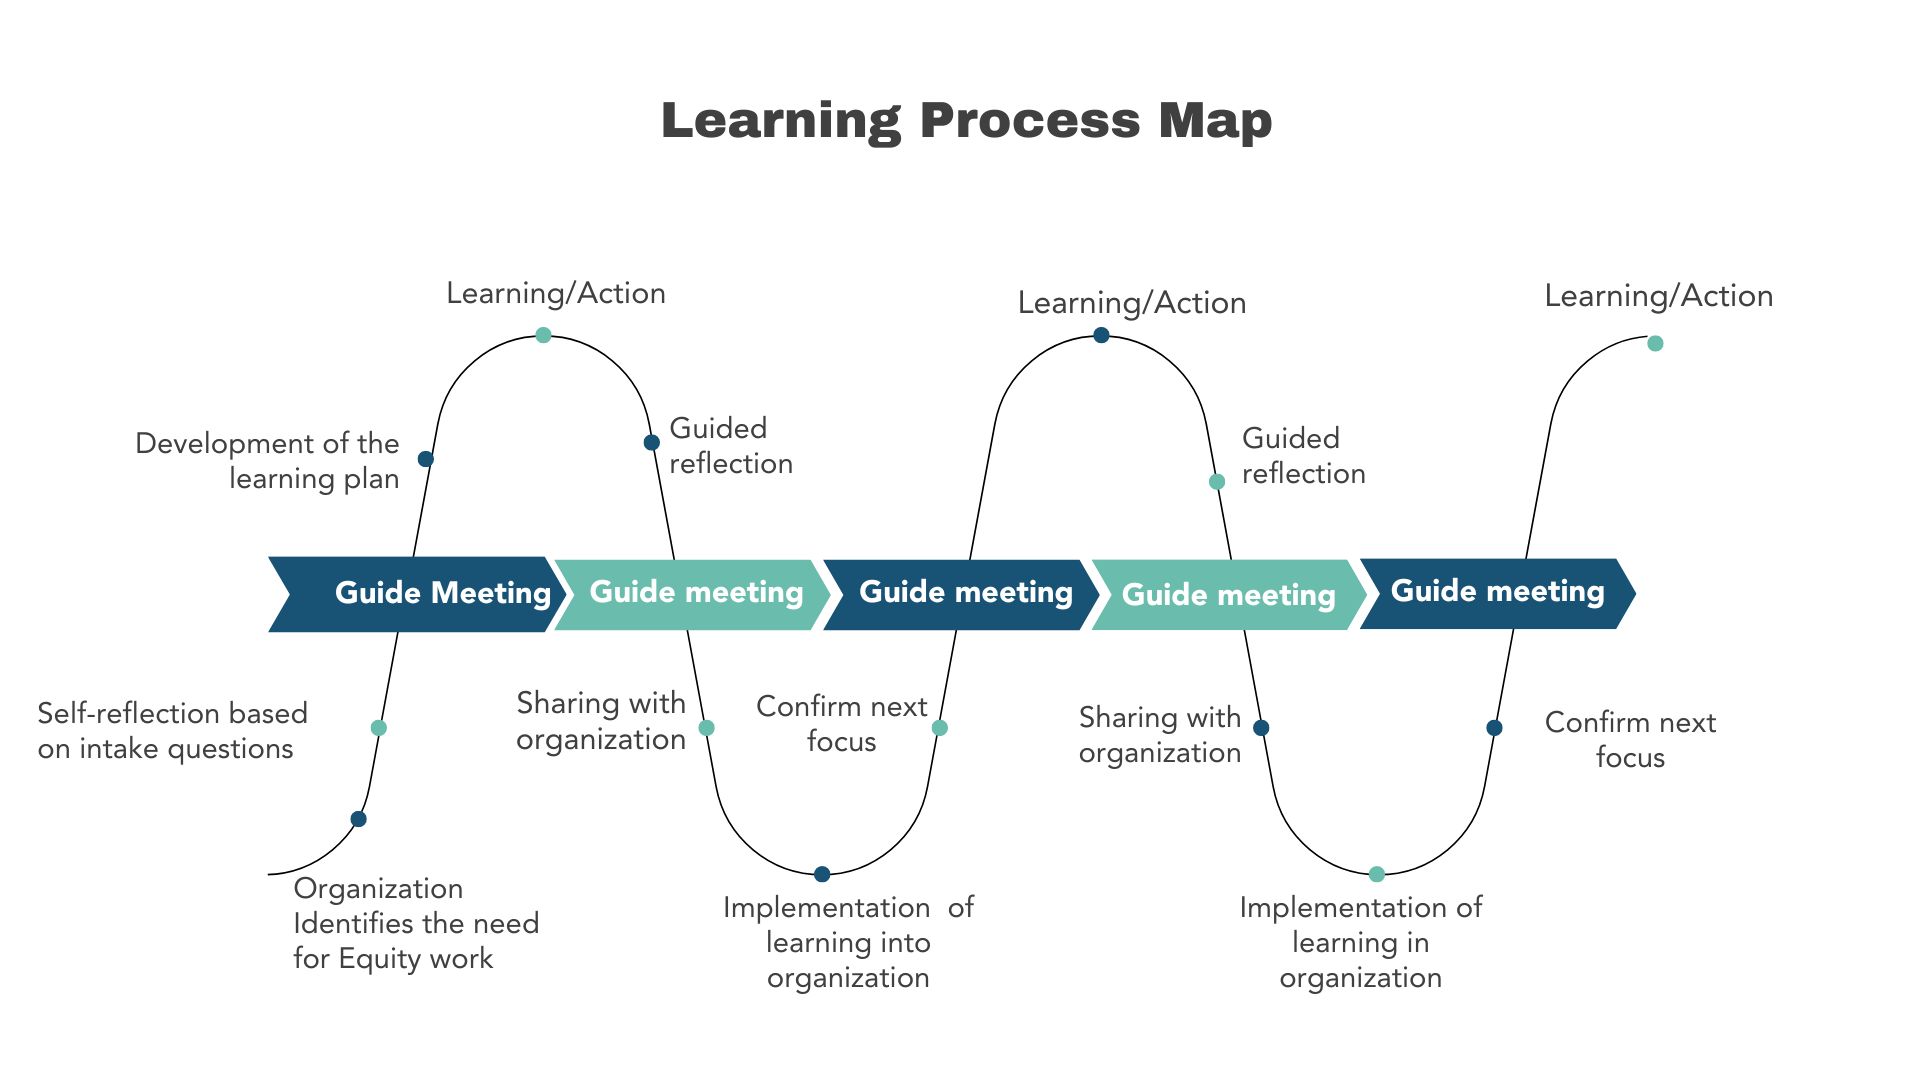 Learning process map. 1. Organization Identifies the need for Equity work 2.Self-reflection based on intake questions 3. Check-in meeting with Guide. 4. Development of the learning plan 5.Learning/Action 6. Guided Reflection 7. Check-in with guide 8. Sharing with the organization. 9. Implementation of learning into the organization. 10. confirm next focus. The cycle repeats over the course of the program.